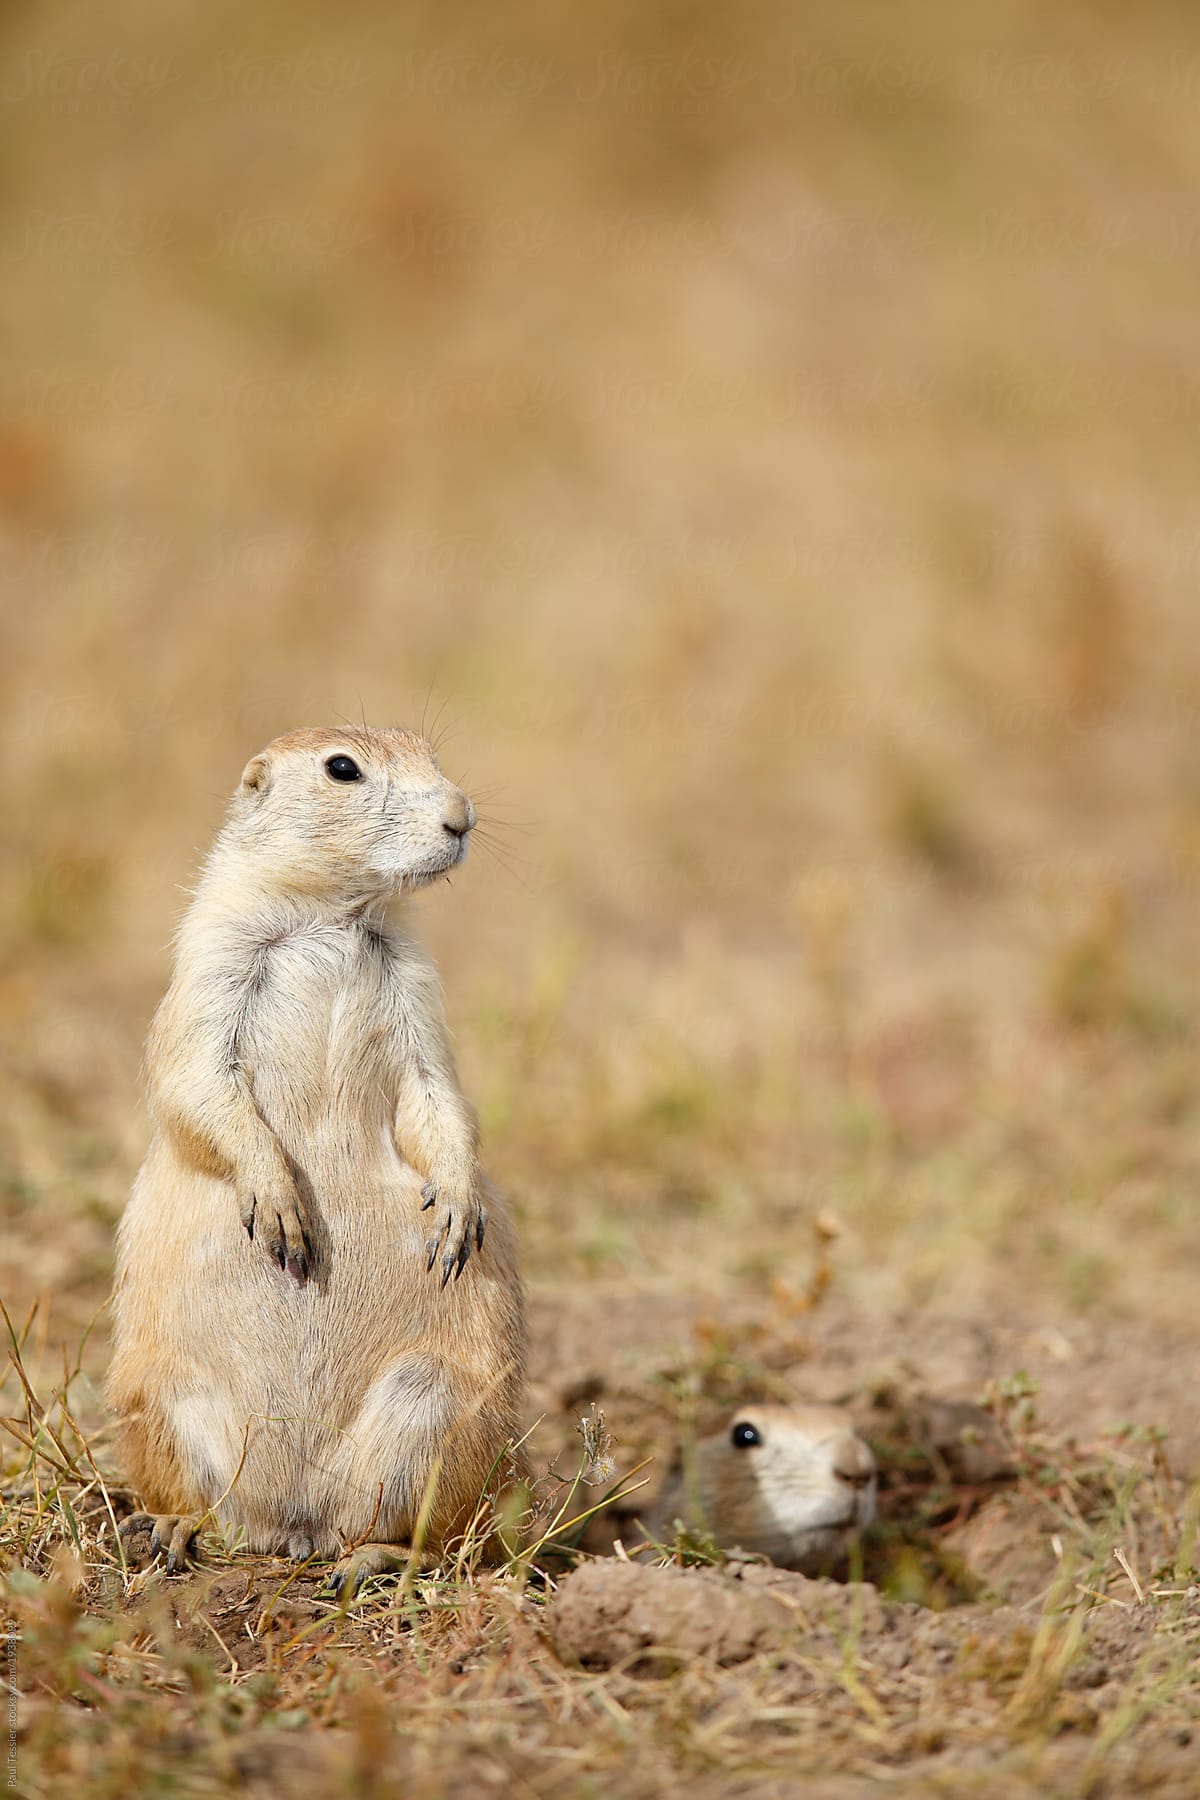 Two Blakc-tailed Prairie Dogs